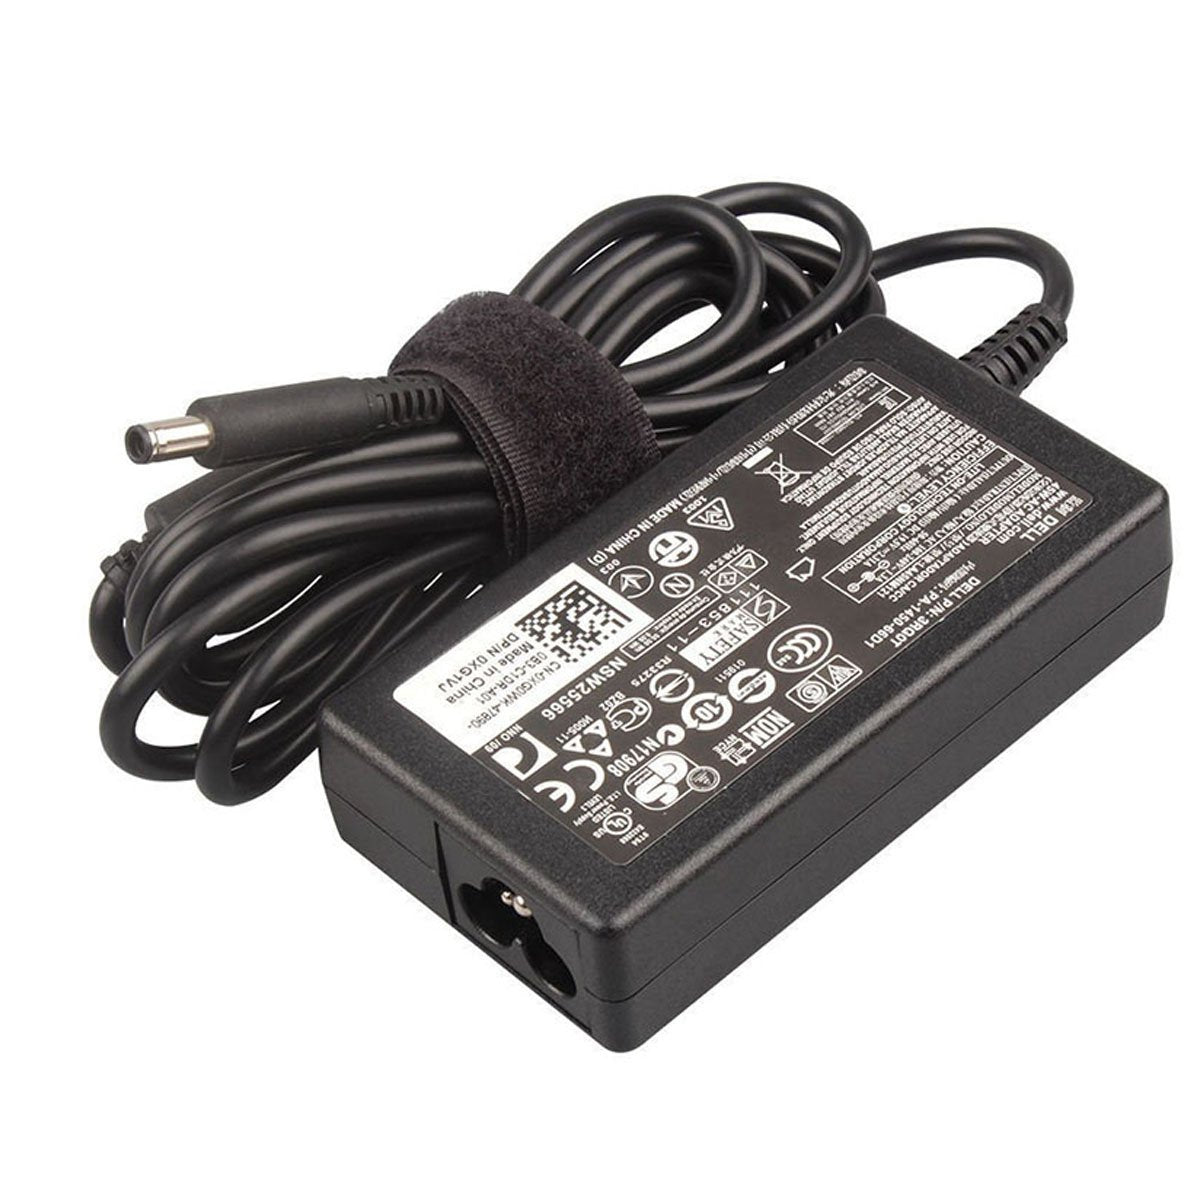 Dell Inspiron 11 3180 Original 45W Laptop Charger Adapter With Power Cord 19.5V 4.5mm Pin